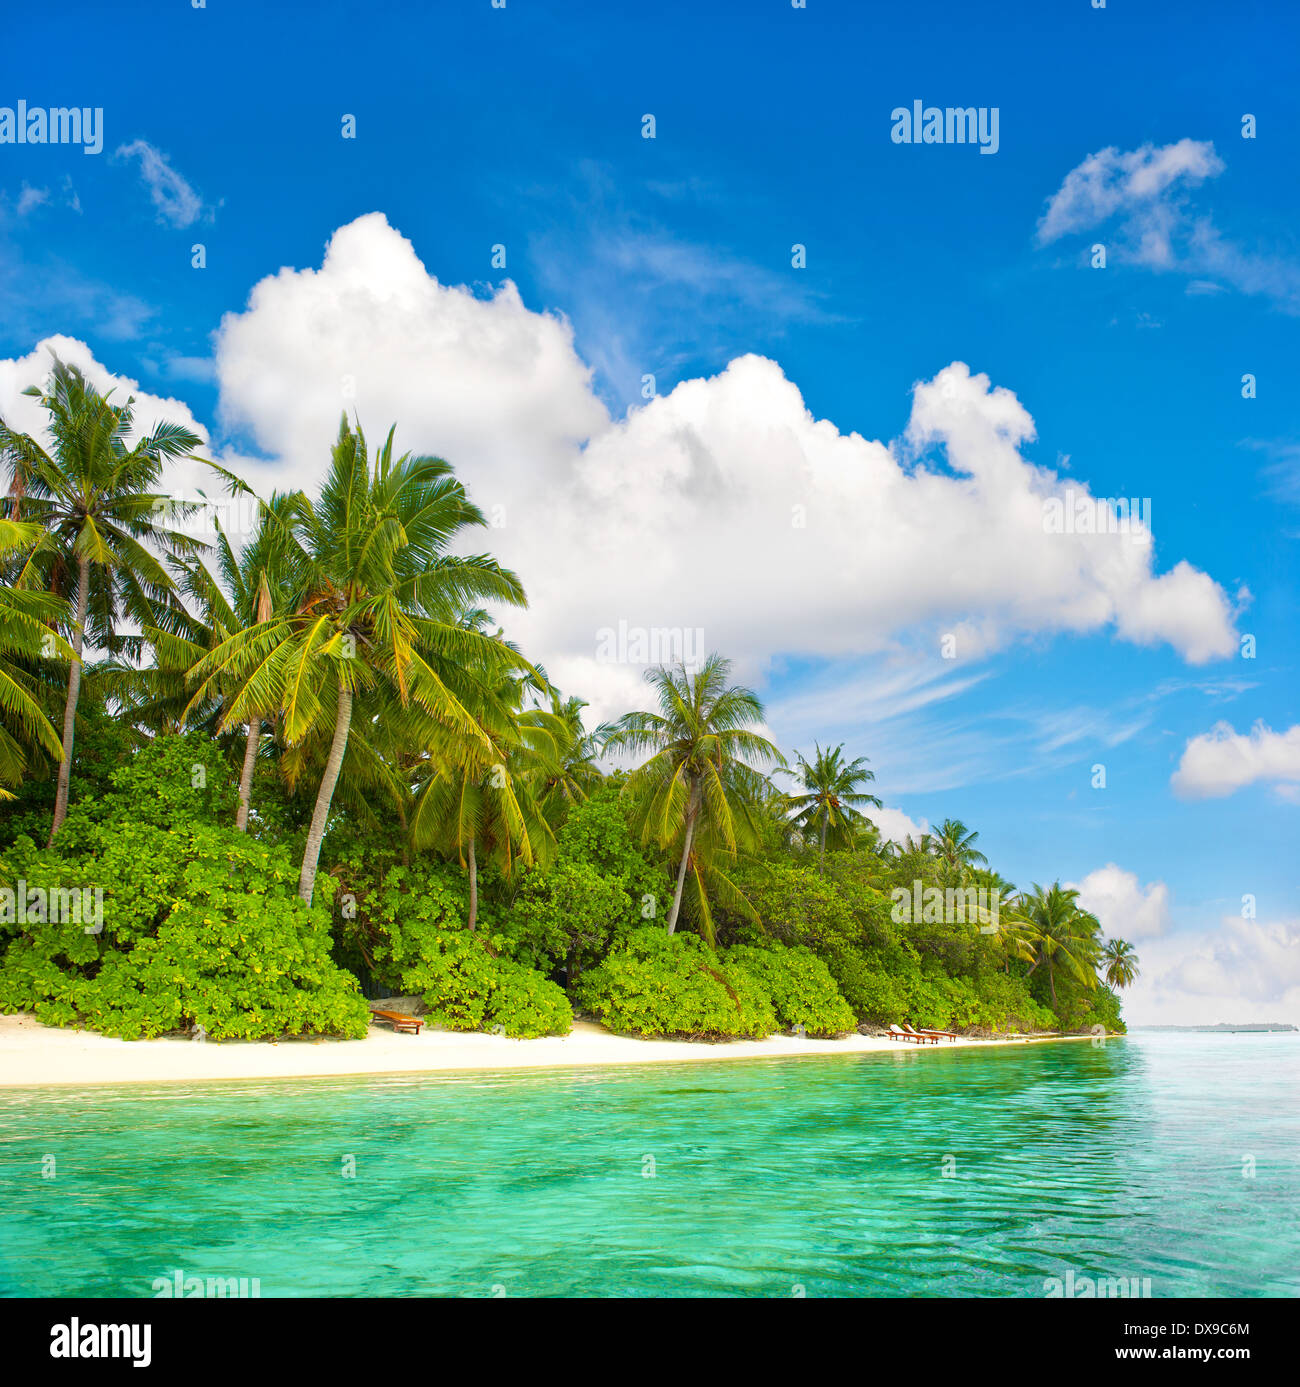 landscape of tropical island beach with palm trees and cloudy blue sky Stock Photo